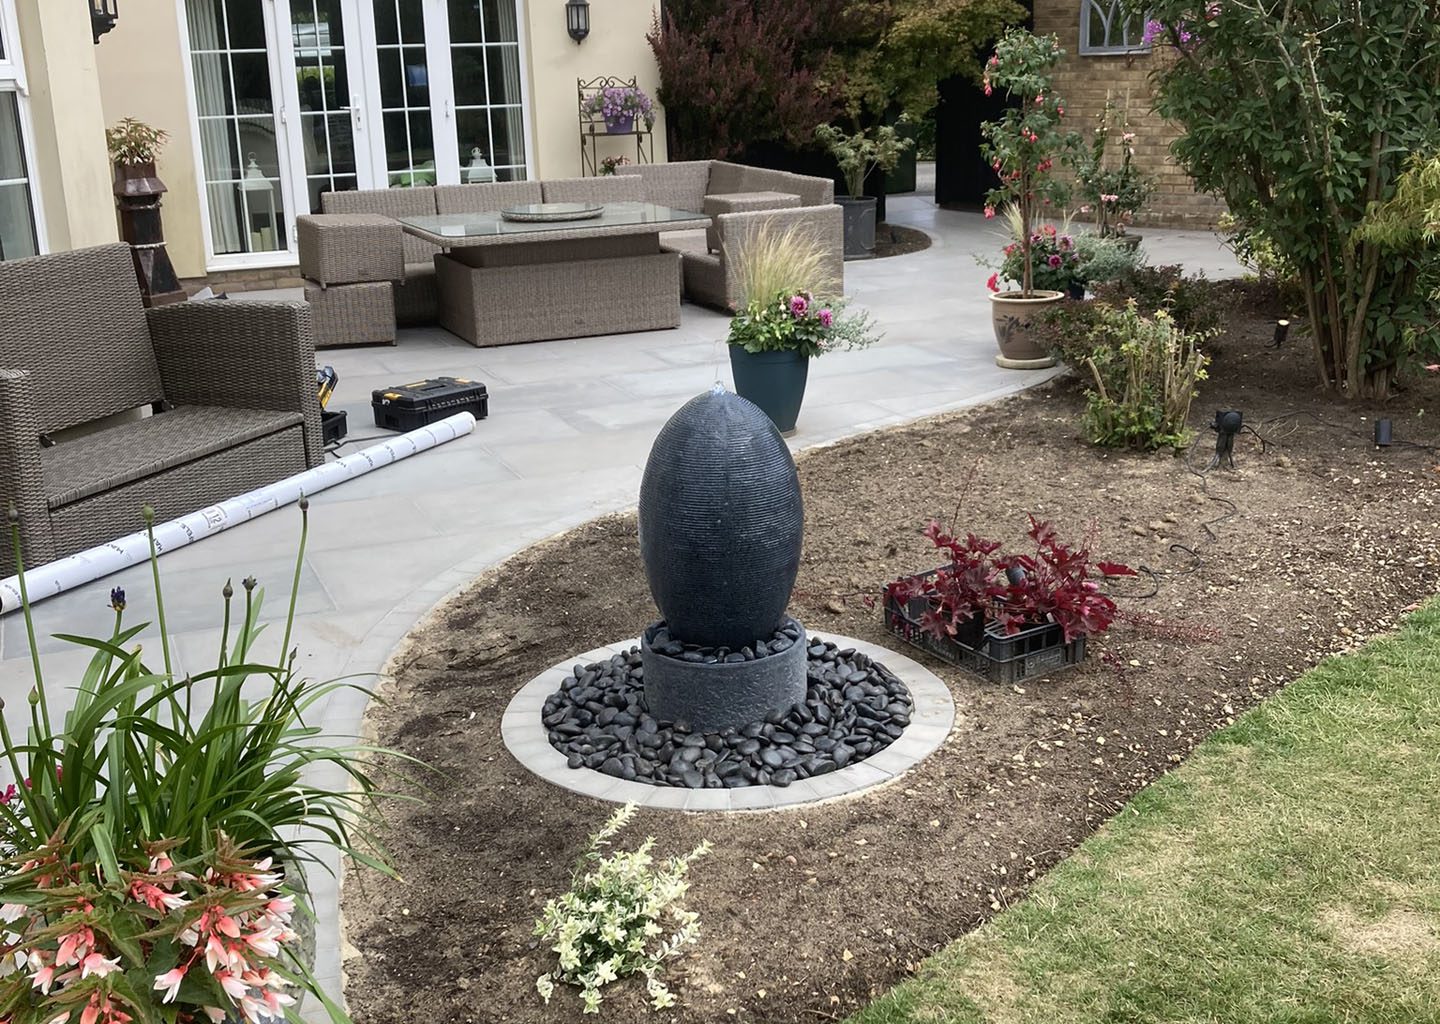 Sculpture water feature in plant border in front of paved patio area for garden seating